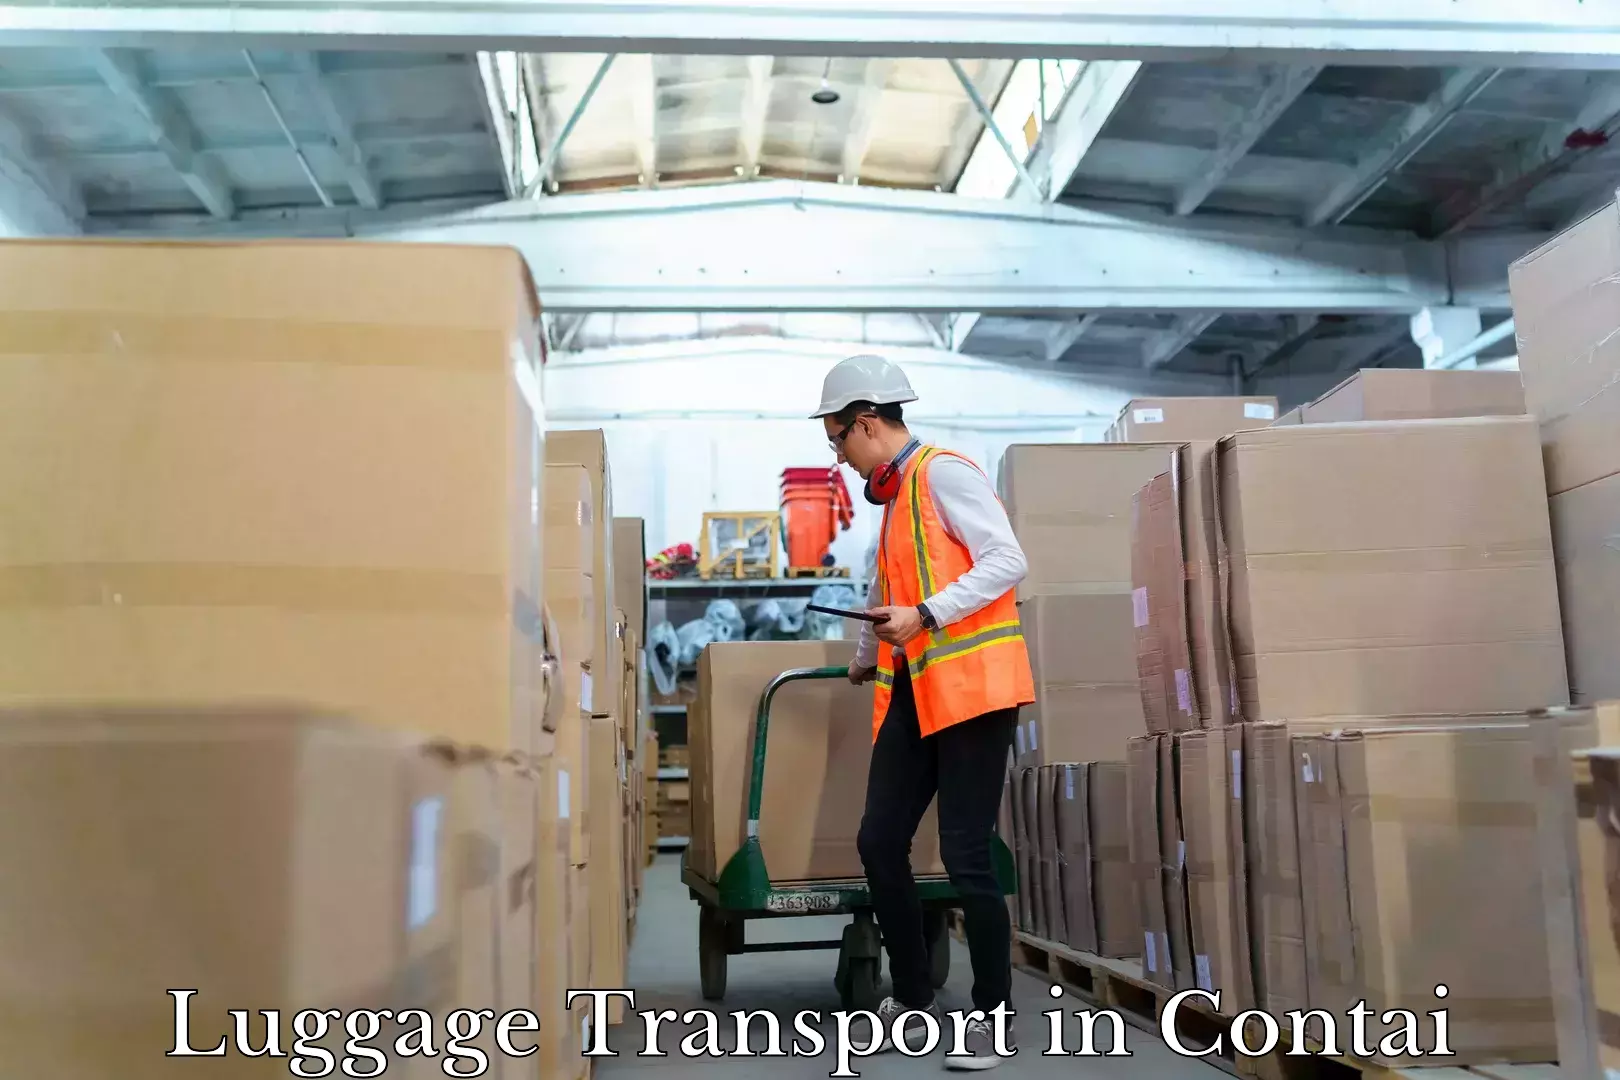 Luggage shipment tracking in Contai